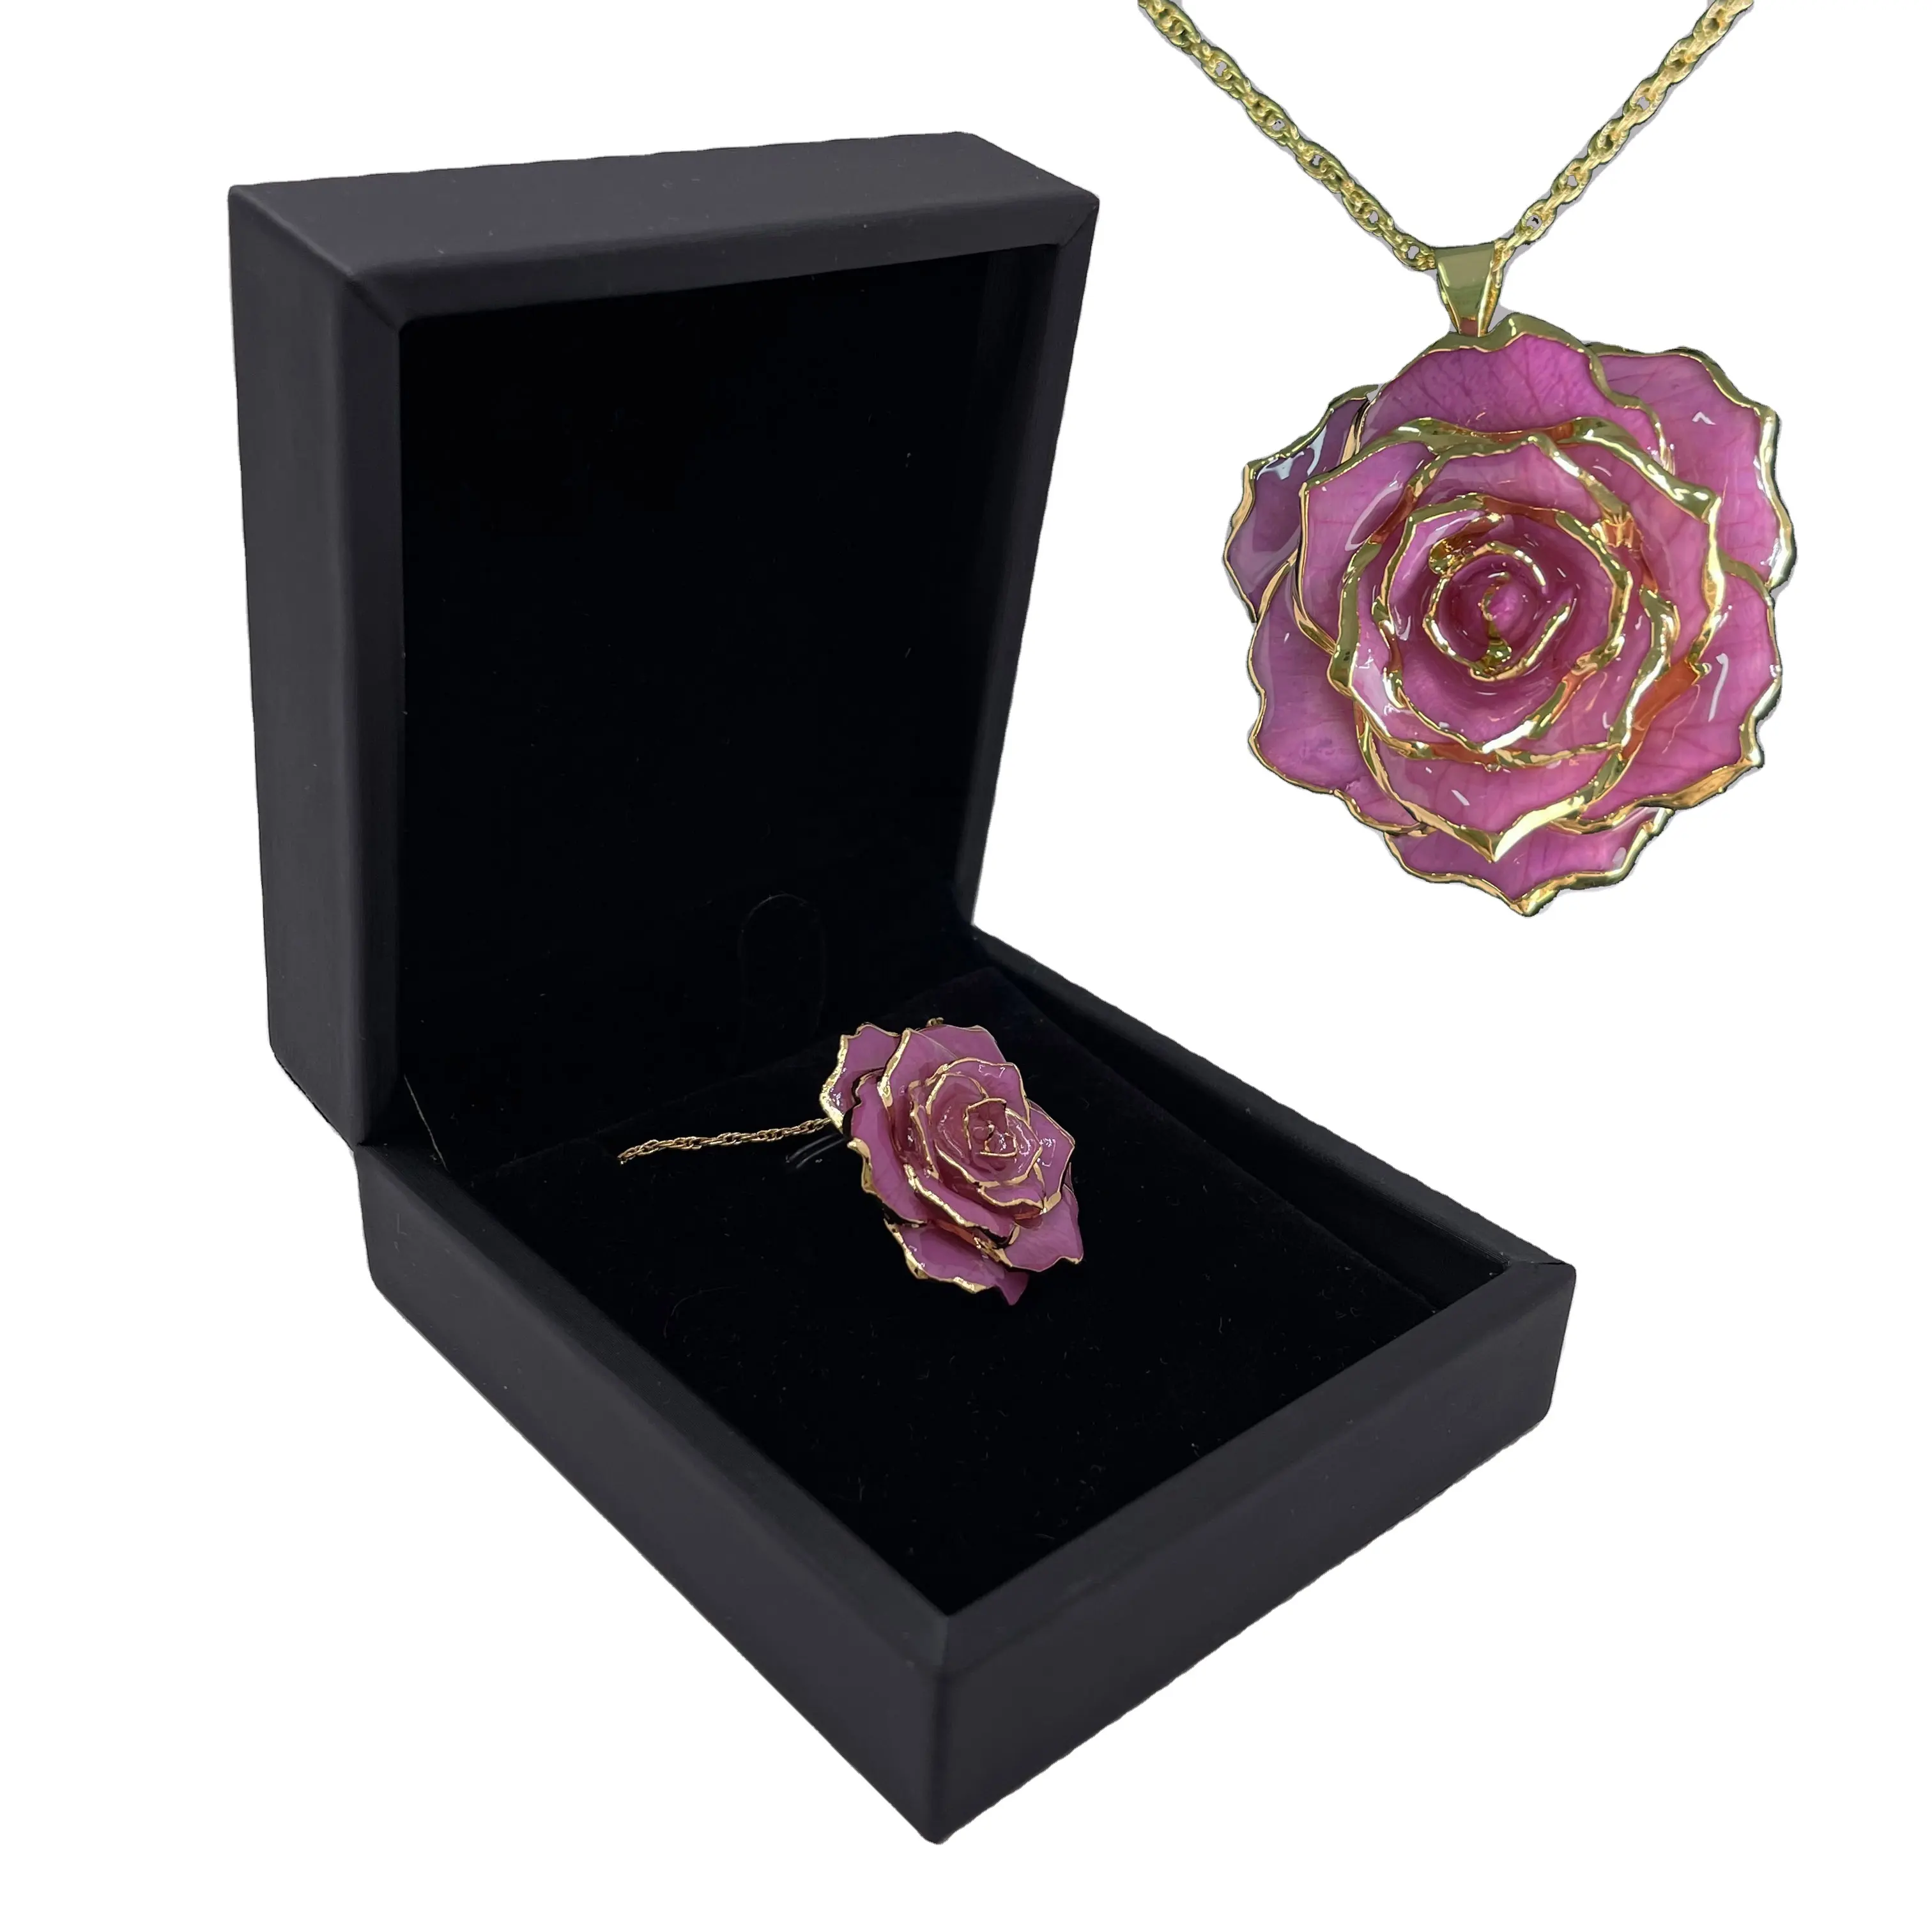 24K Gold Plated Real Rose Necklace Handmade Craft Natural Flower Jewelry Lavender color necklace Romantic gifts for ladies